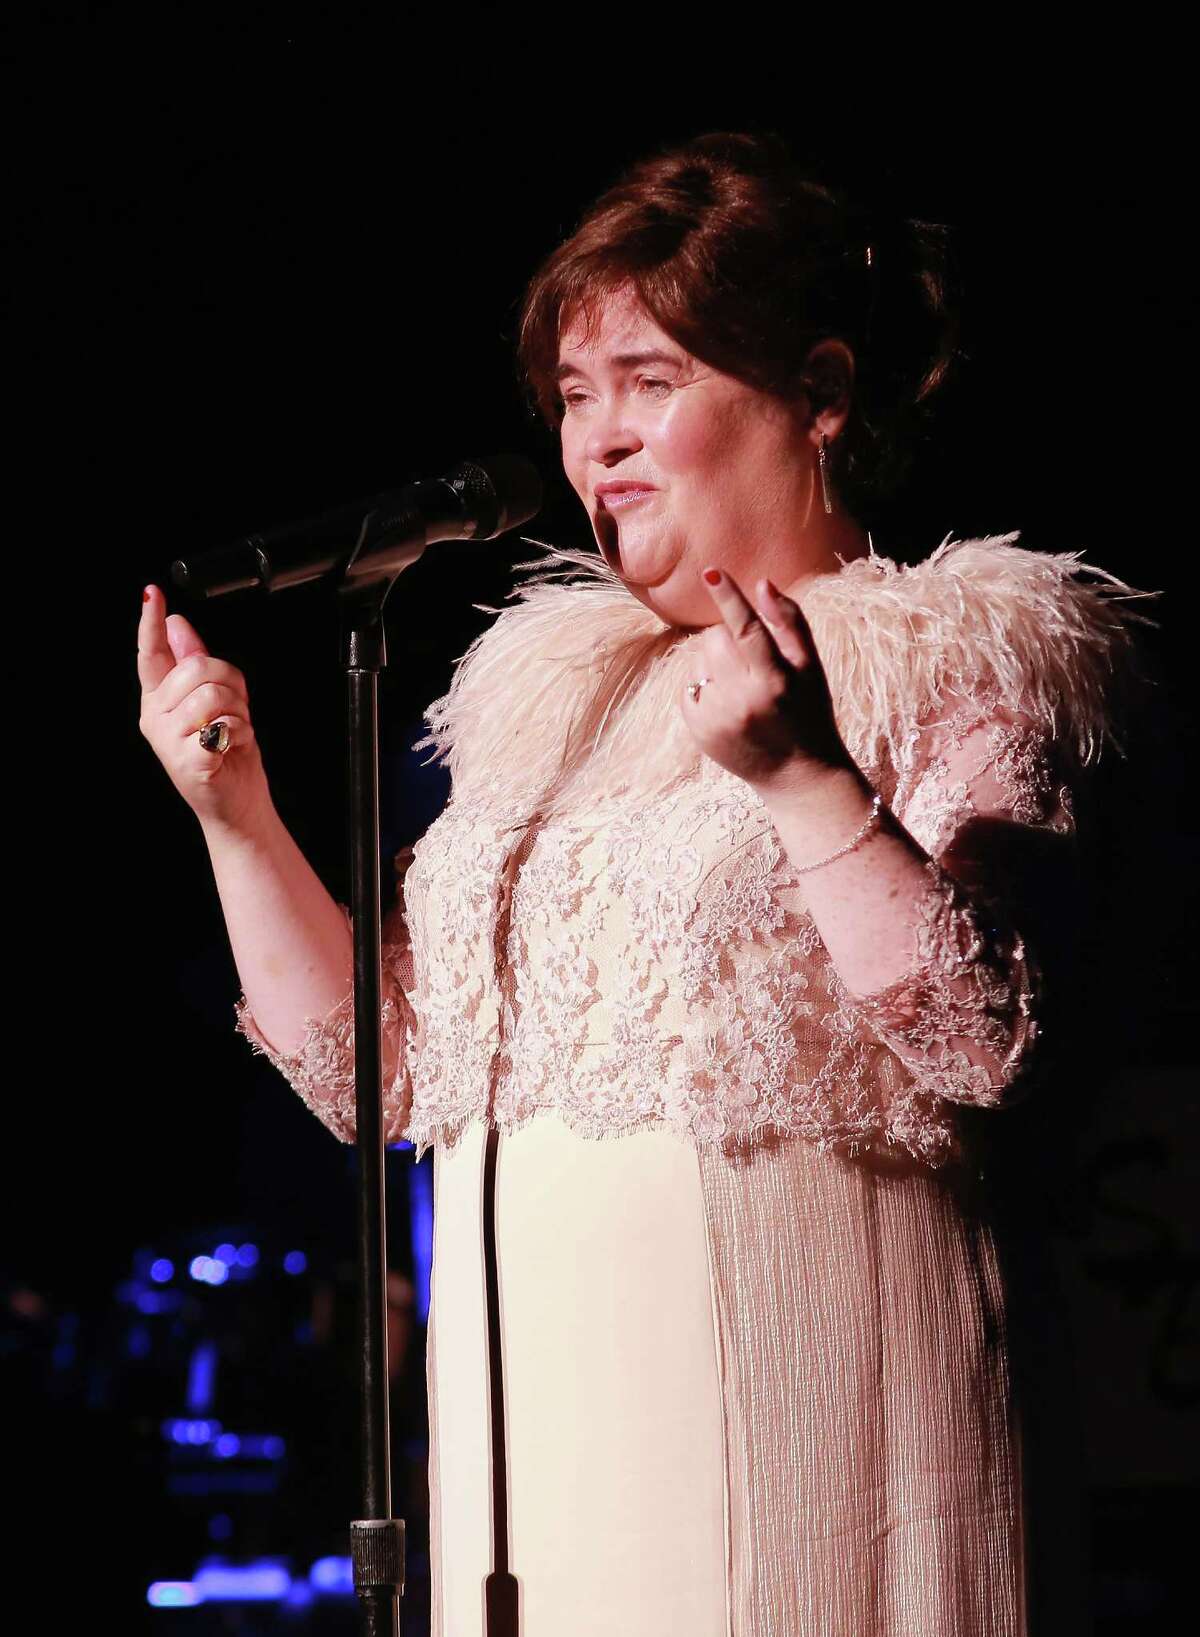 SAN DIEGO, CA - OCTOBER 08: Susan Boyle performs at the Balboa Theater on October 8, 2014 in San Diego, California. The concert was the first of Boyle's 21-date city tour in the United States. (Photo by Robert Benson/Getty Images for Susan Boyle)